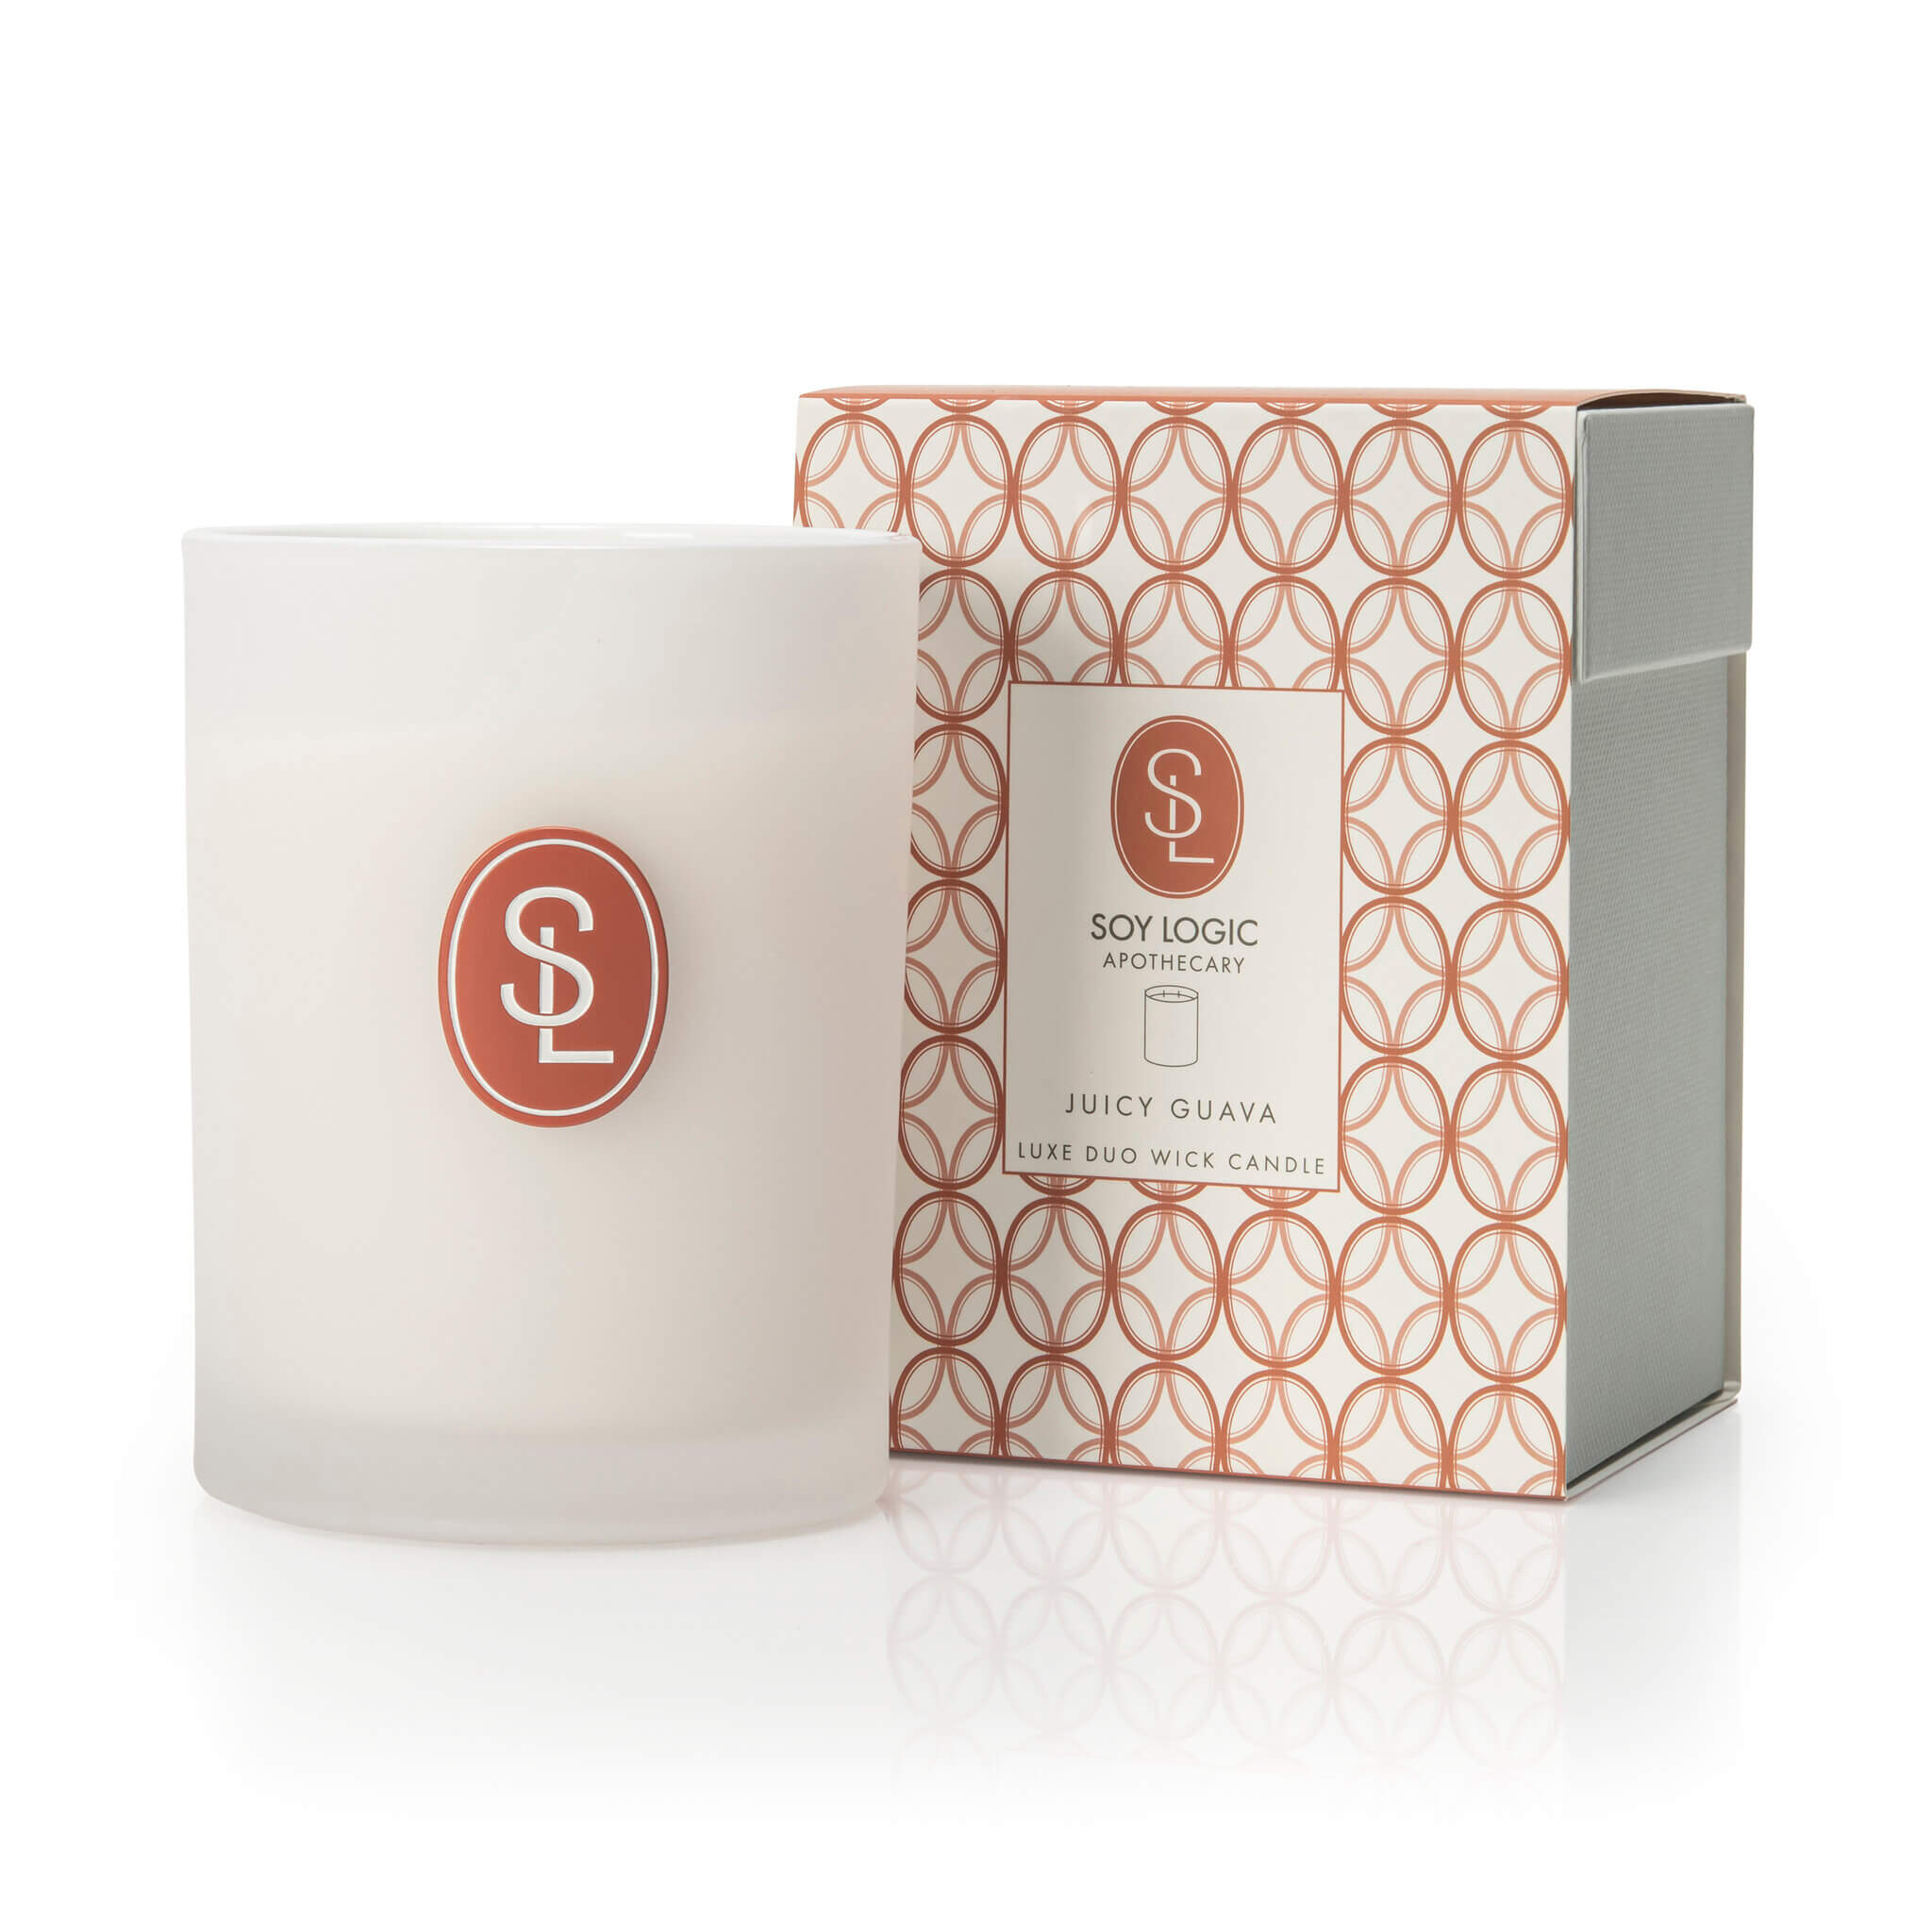 Juicy Guava Classic Duo Wick Candle